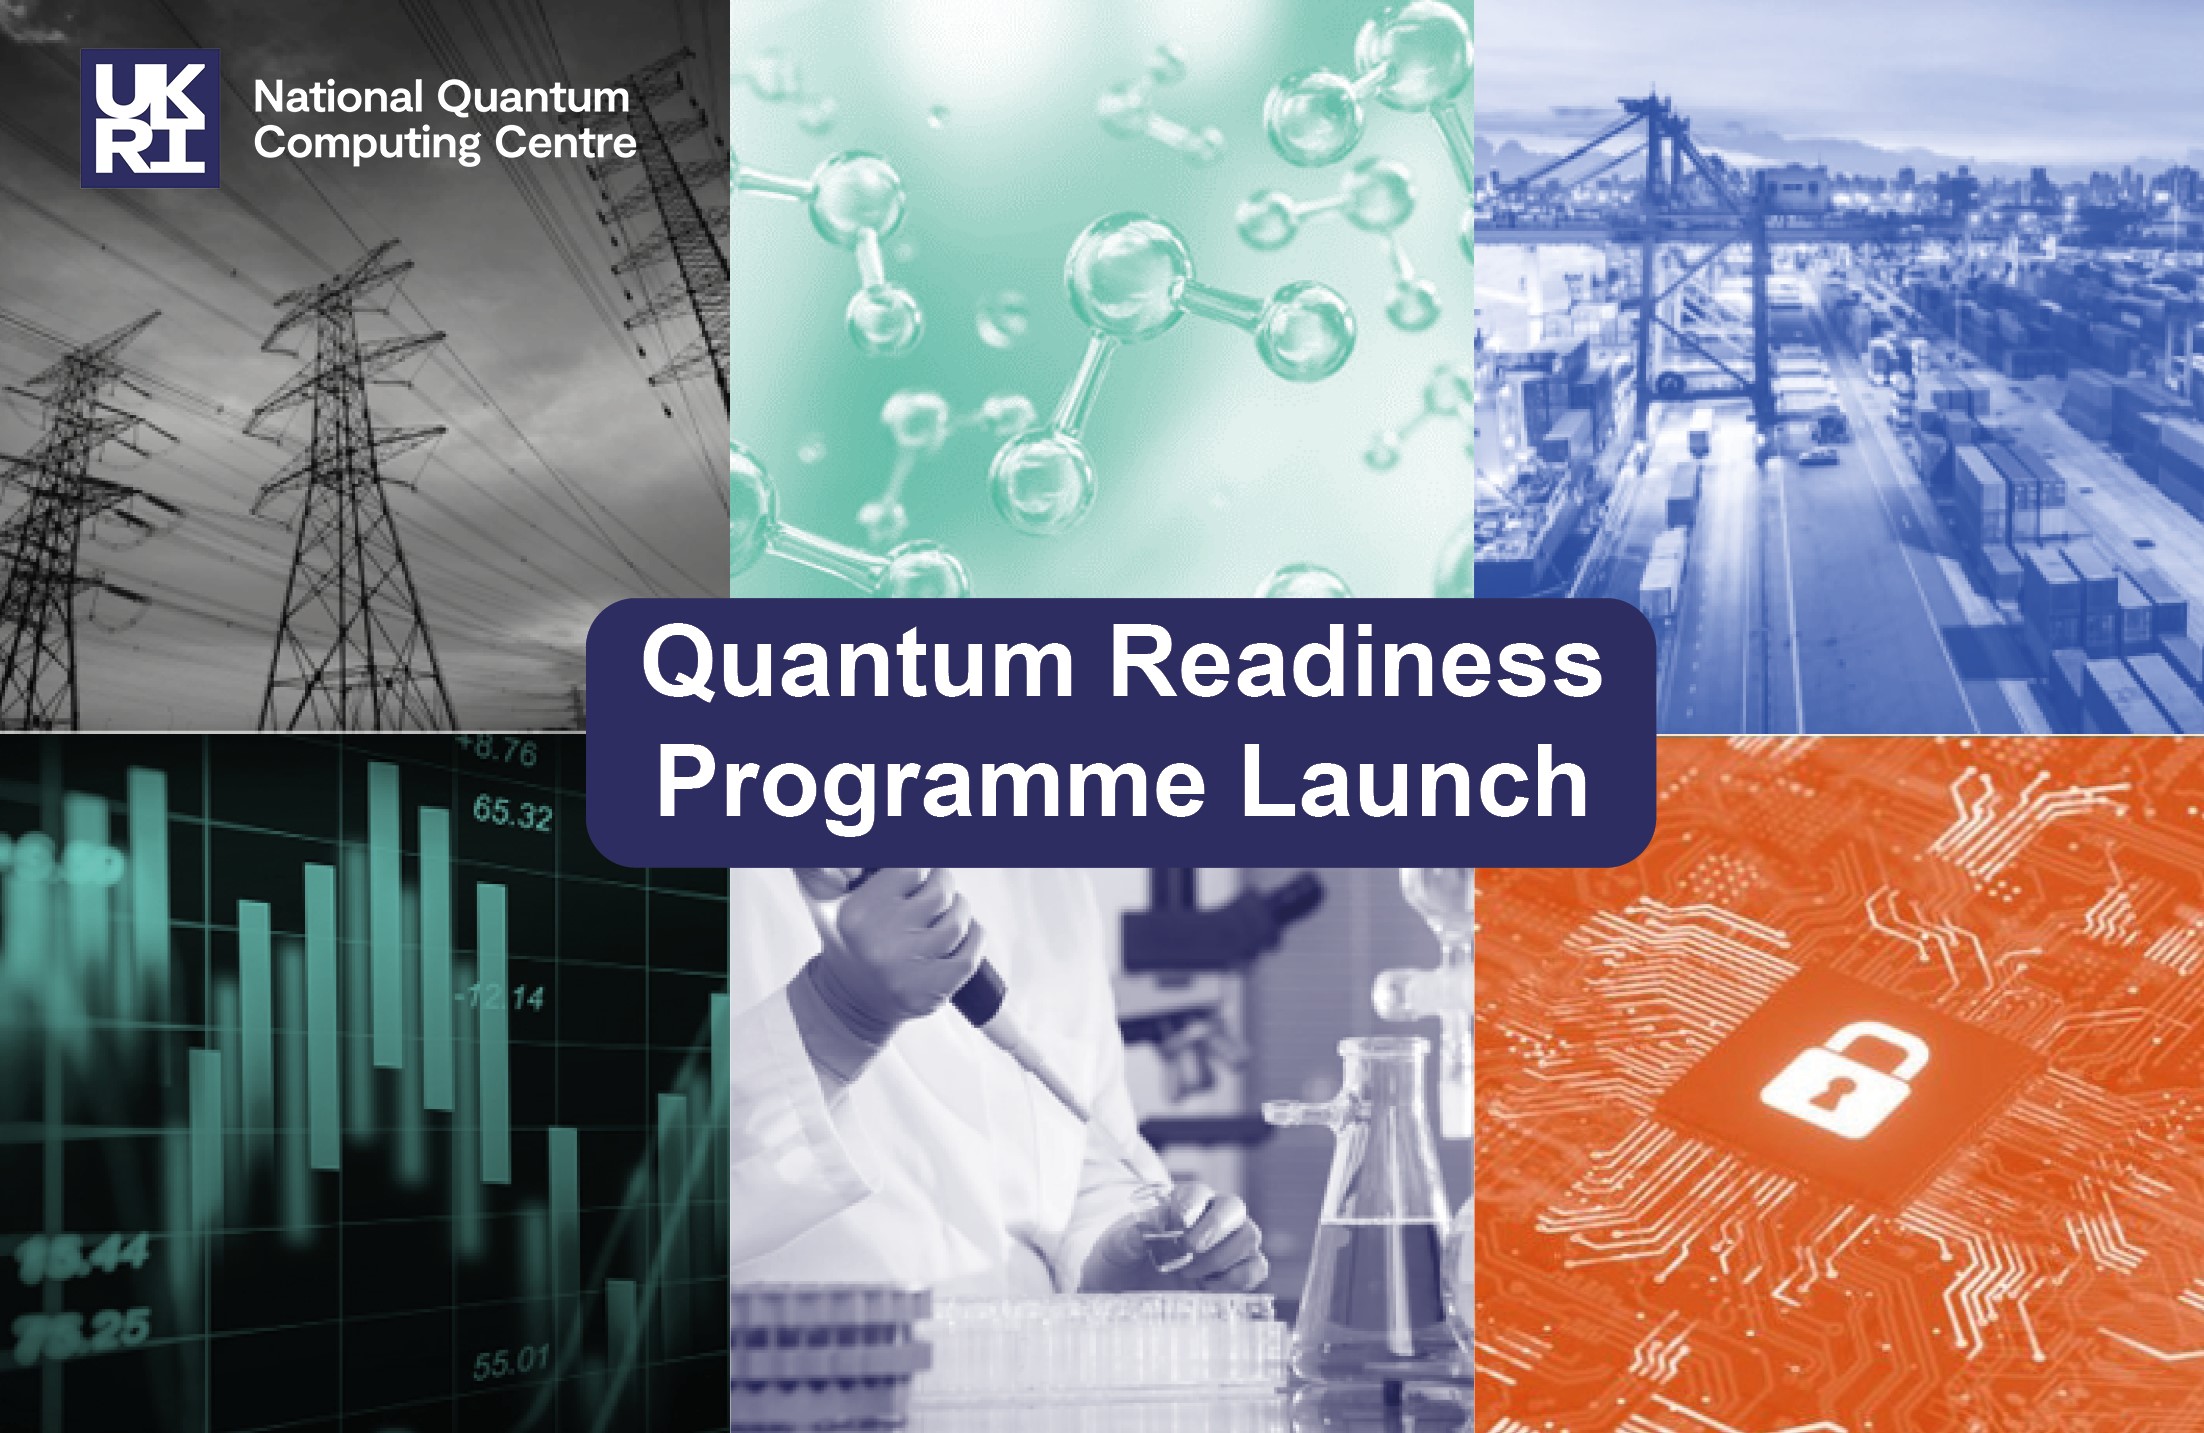 Today the National Quantum Computing Centre has announced the first of its Quantum Readiness Programmes, SparQ at an in-person event being held at Harwell Campus.